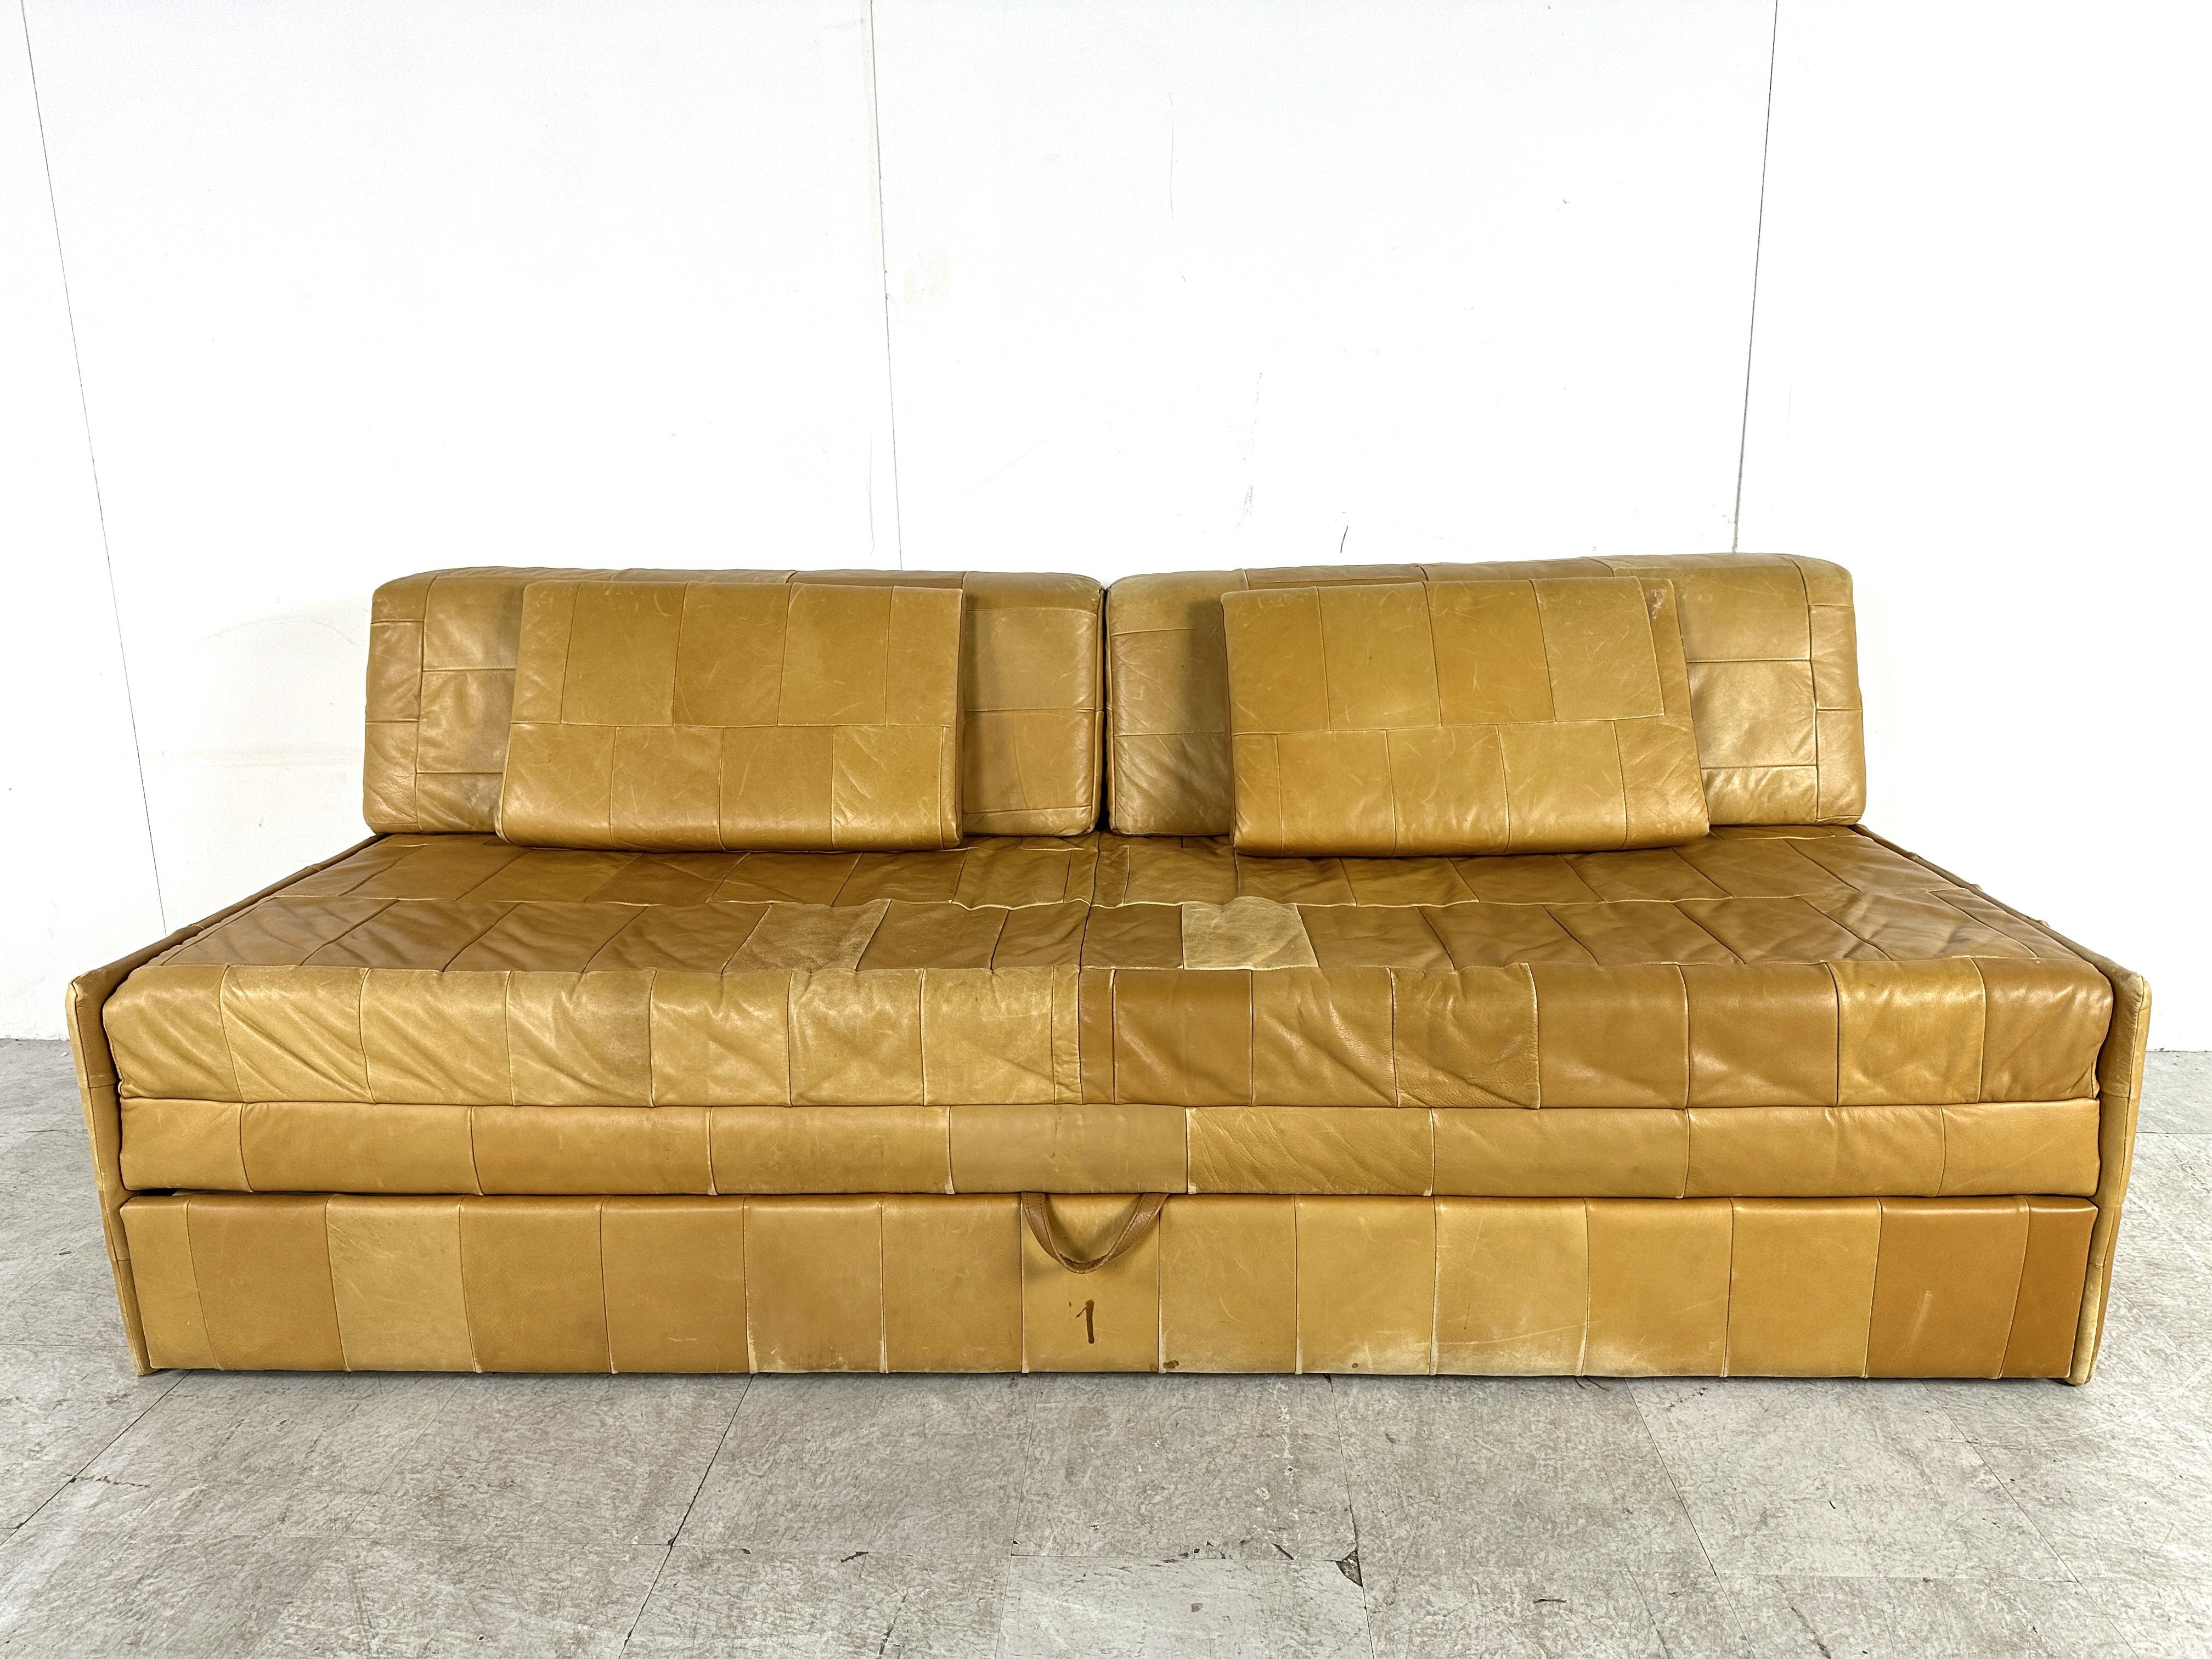 Vintage patchwork leather sofa which can be extended into a bed.

Very handy piece of furniture for a small space or vacation home.

Good vintage look to it thanks to the patchwork leather.

Very much in the style of desede

1970s - Germany

Good